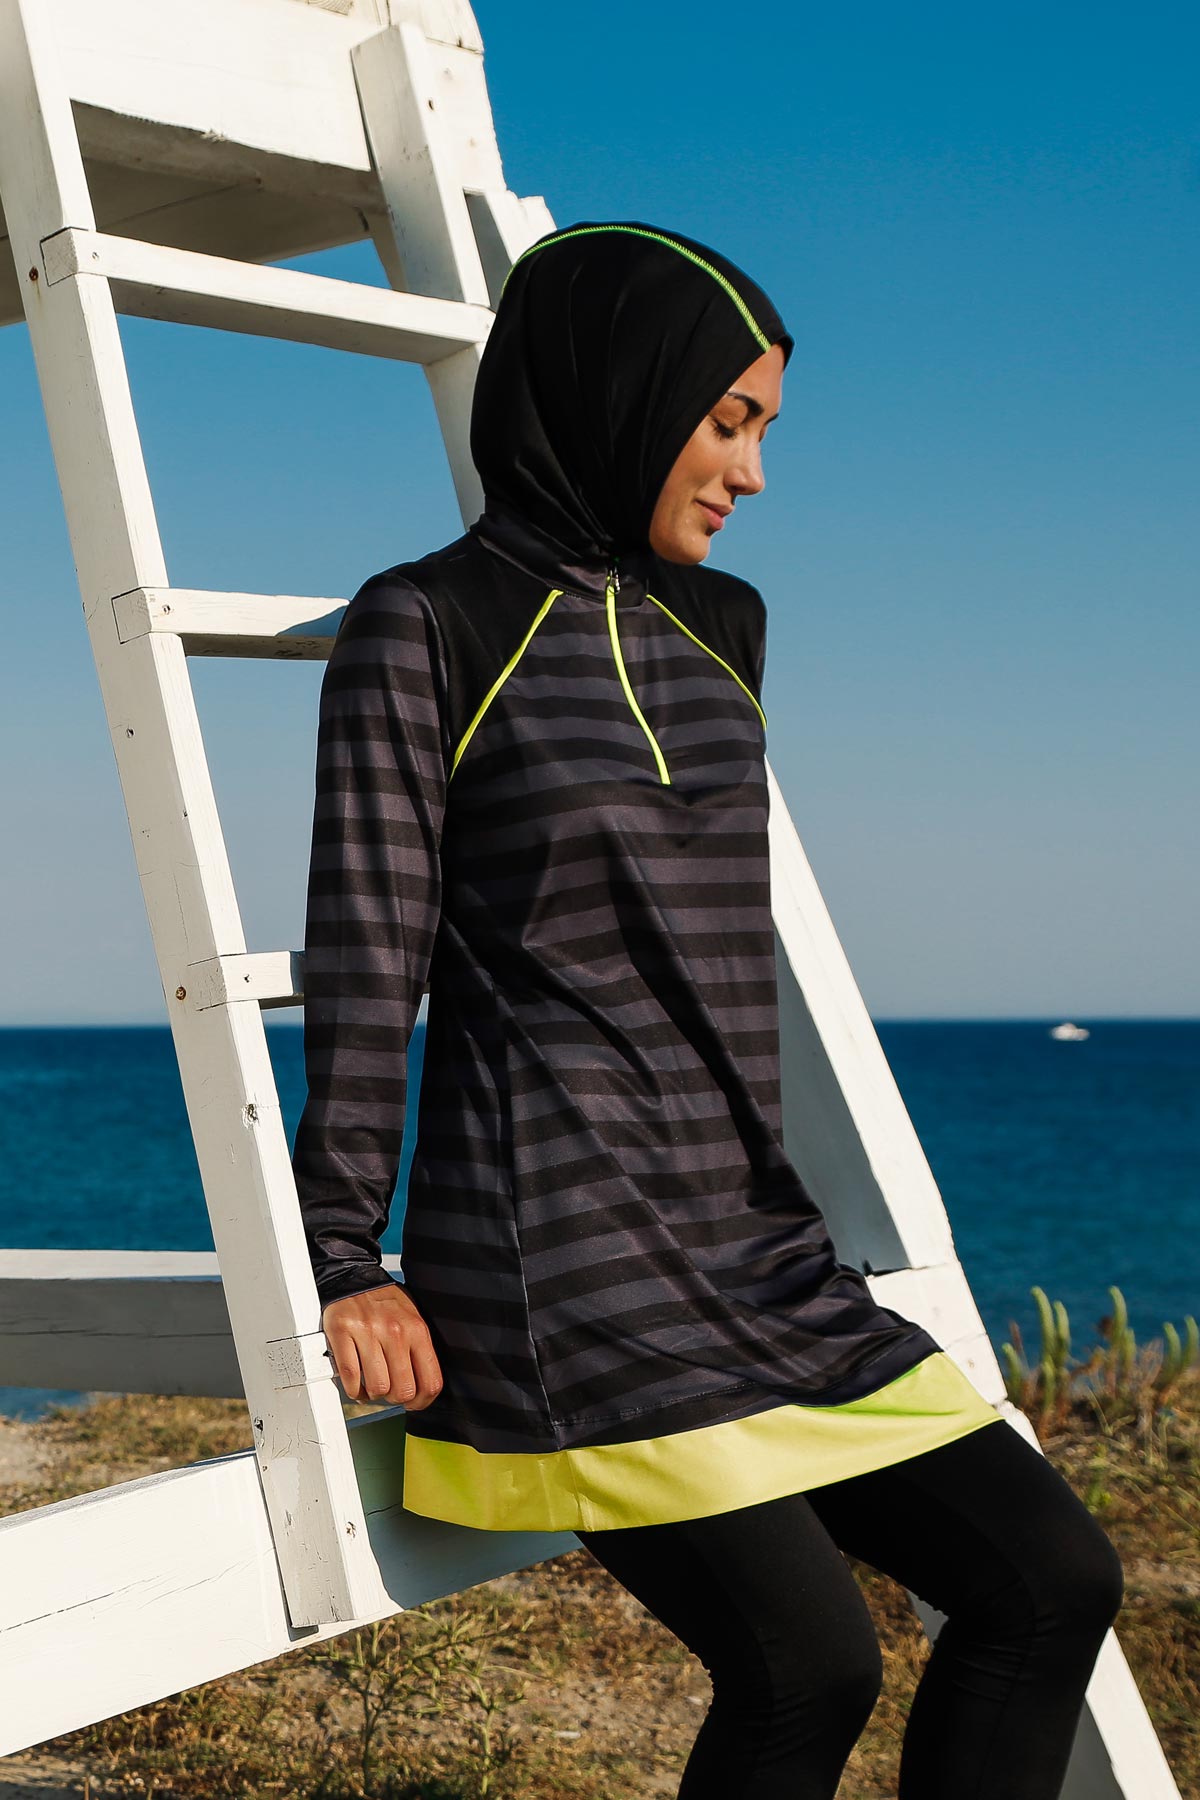 3-piece Black Performance Series Striped Fully Covered Burkini M2232 ...